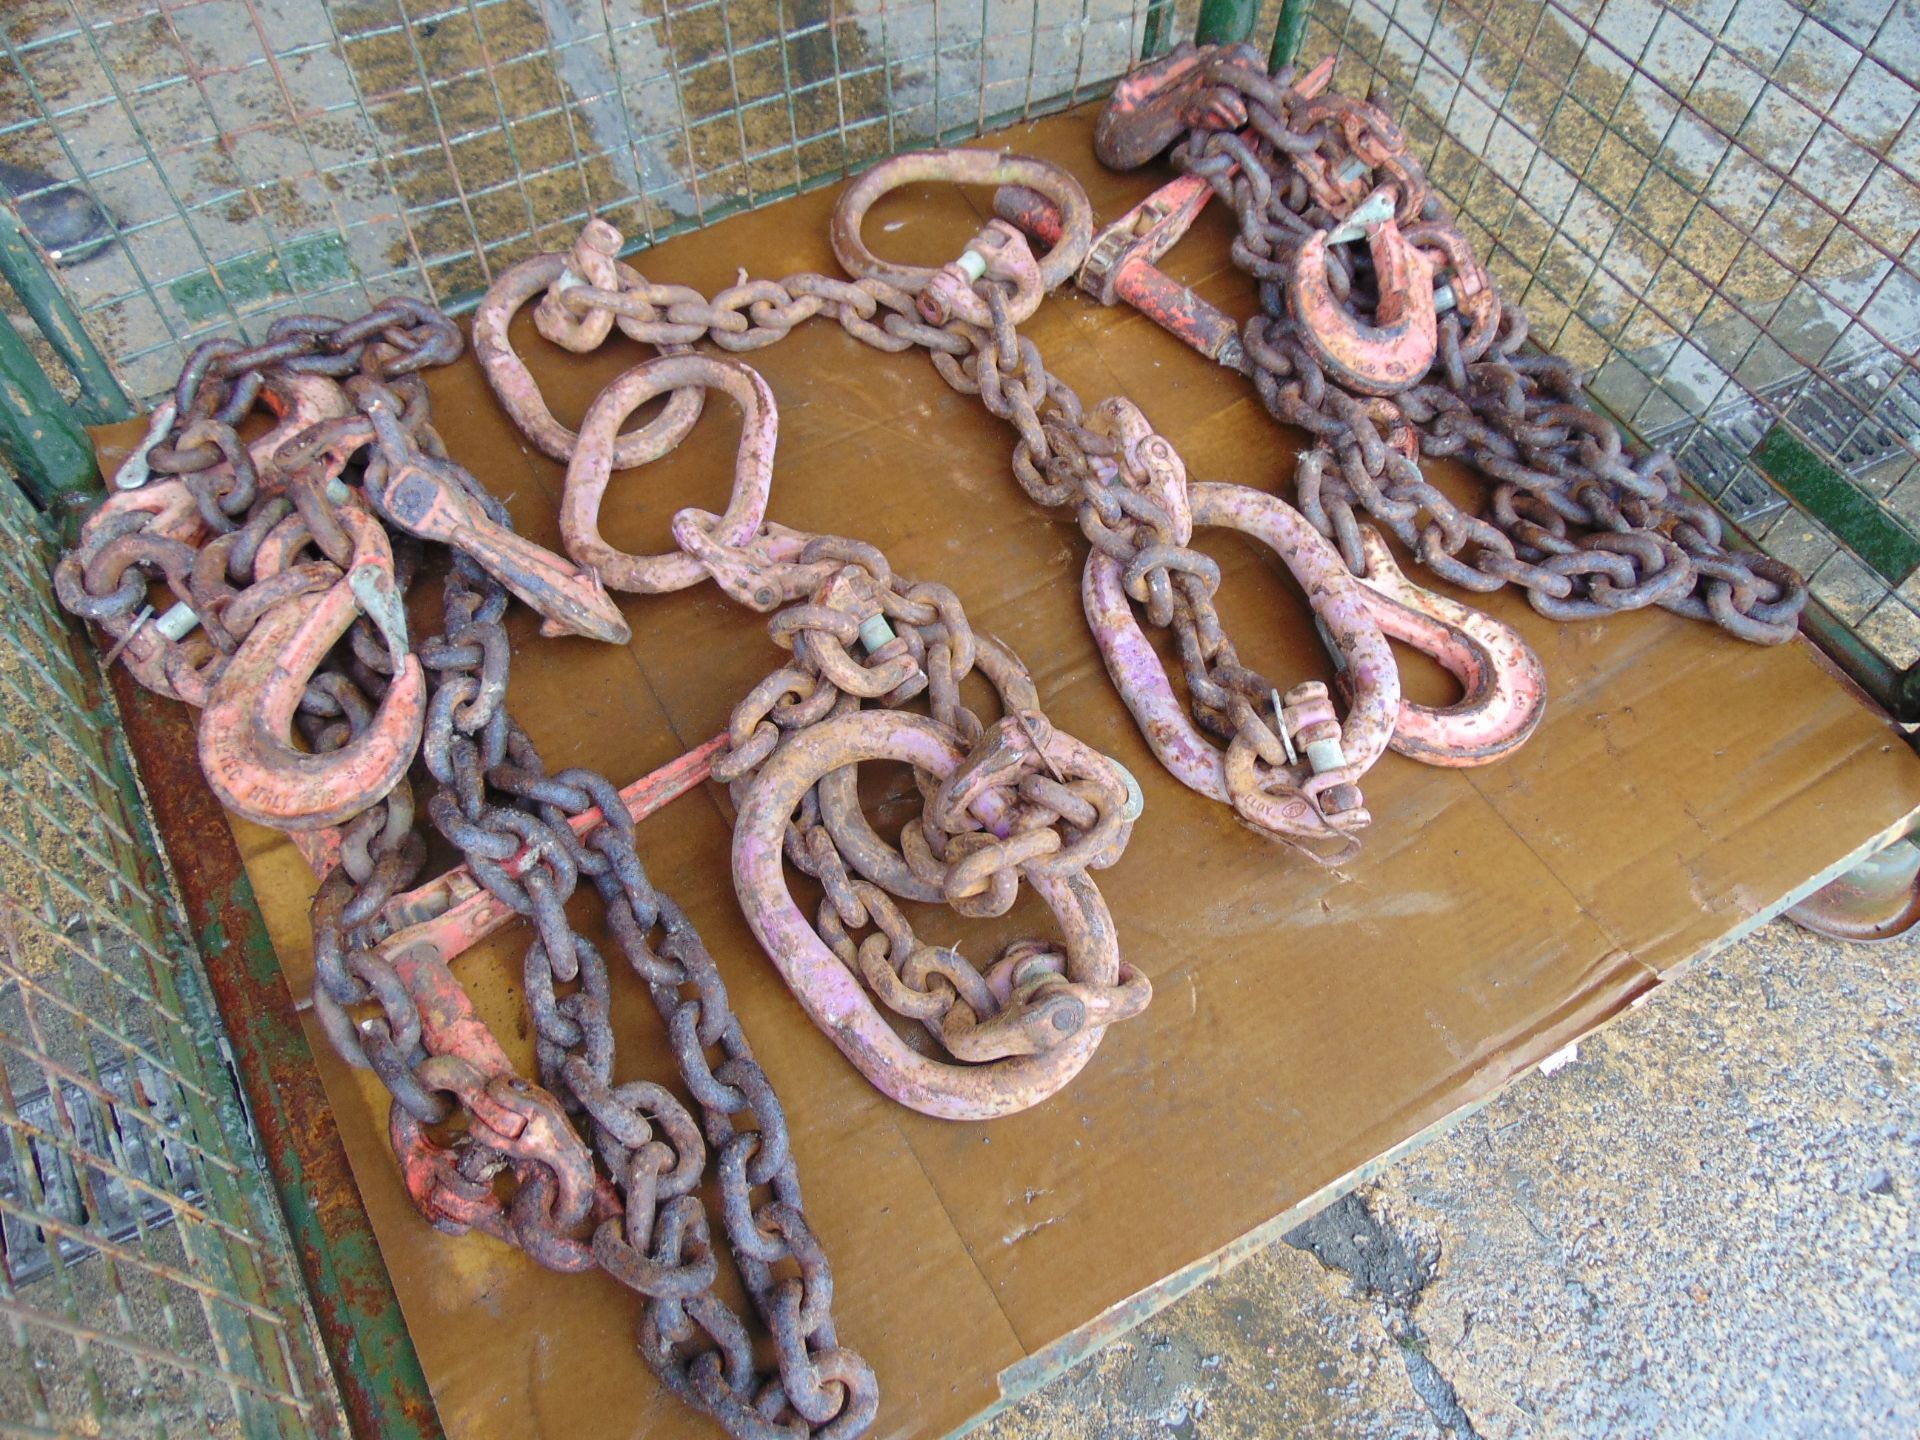 Heavy Duty Load Binders, Lifting Chains etc - Image 2 of 4